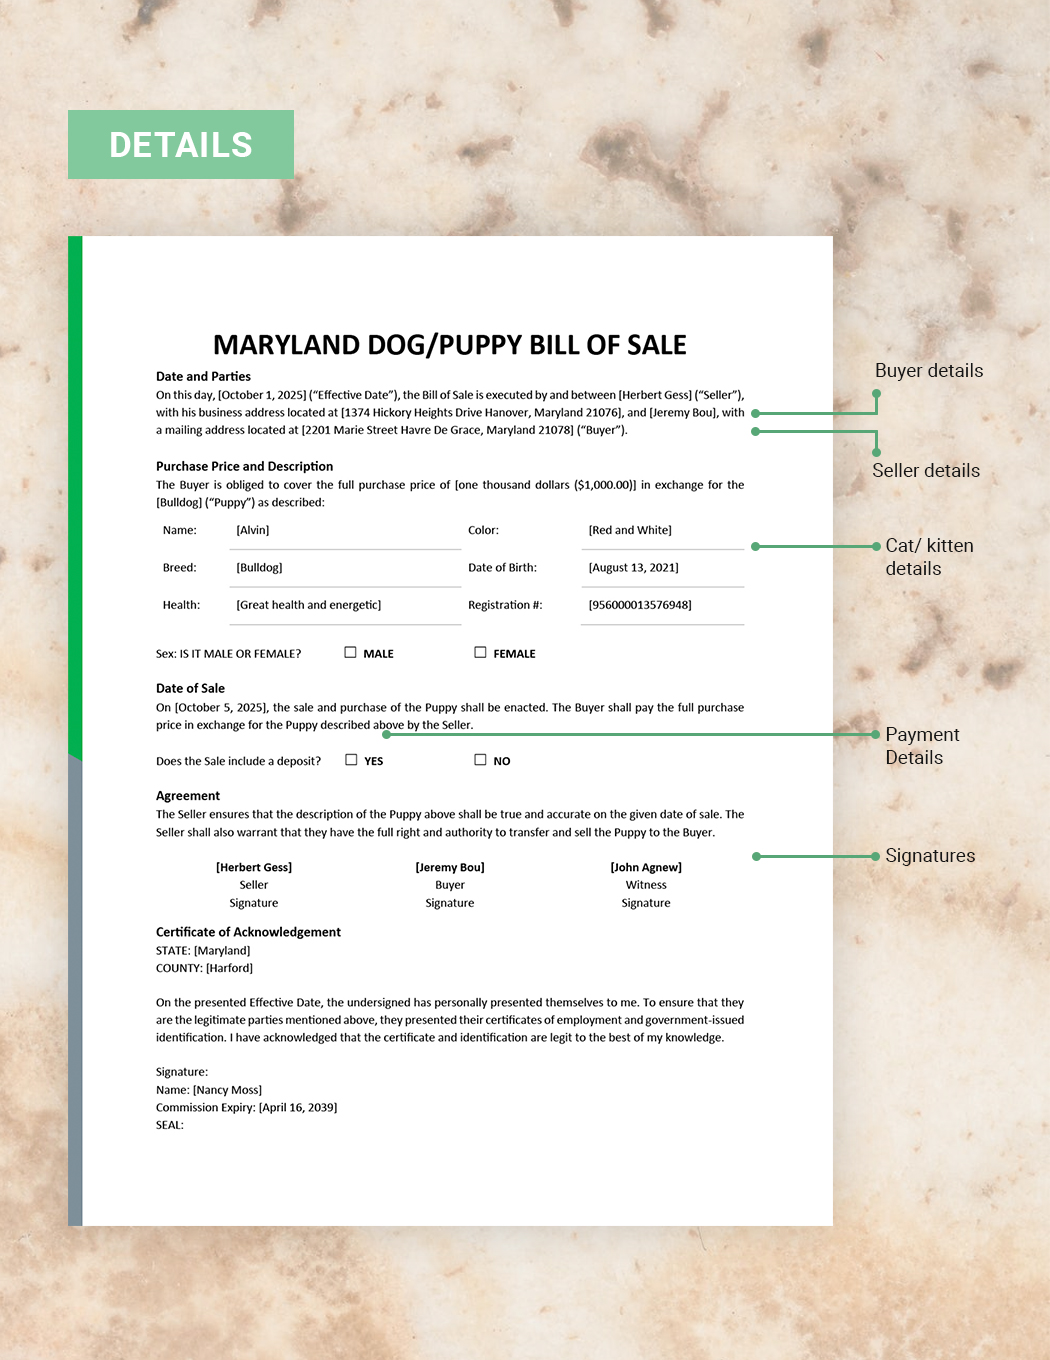 Maryland Dog / Puppy Bill of Sale Template